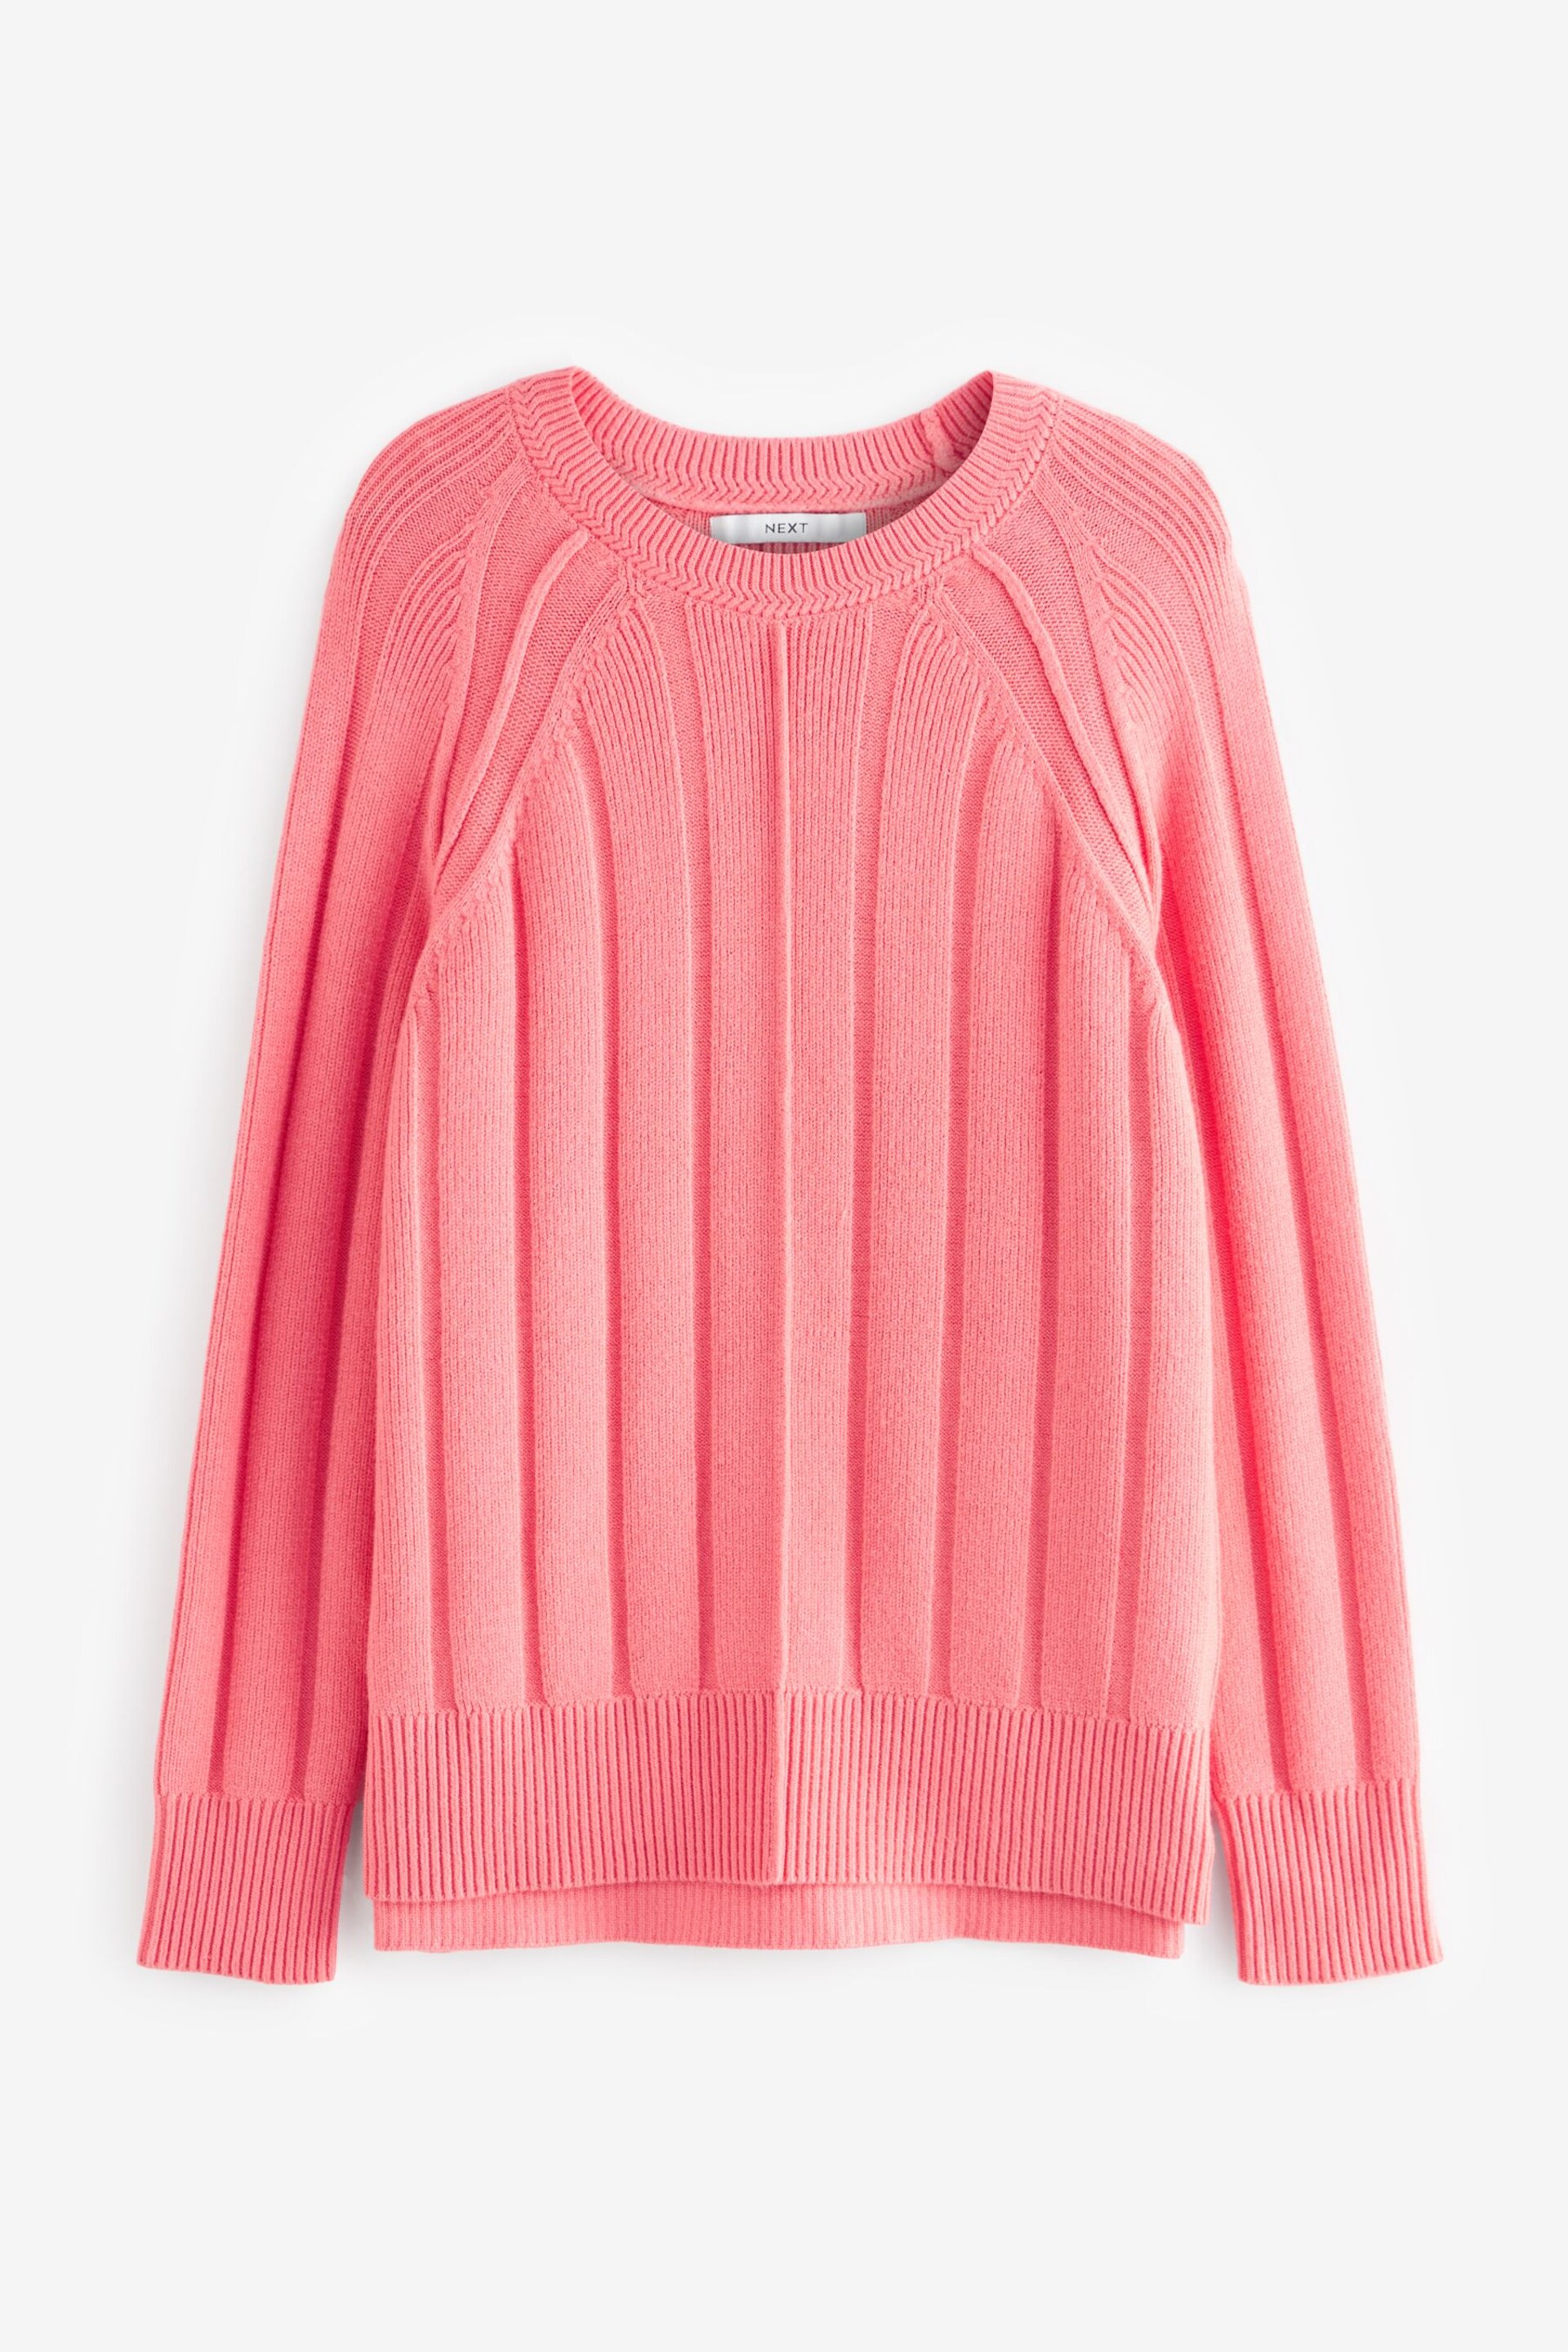 Coral Pink Ribbed Crew Neck Jumper - Image 5 of 6